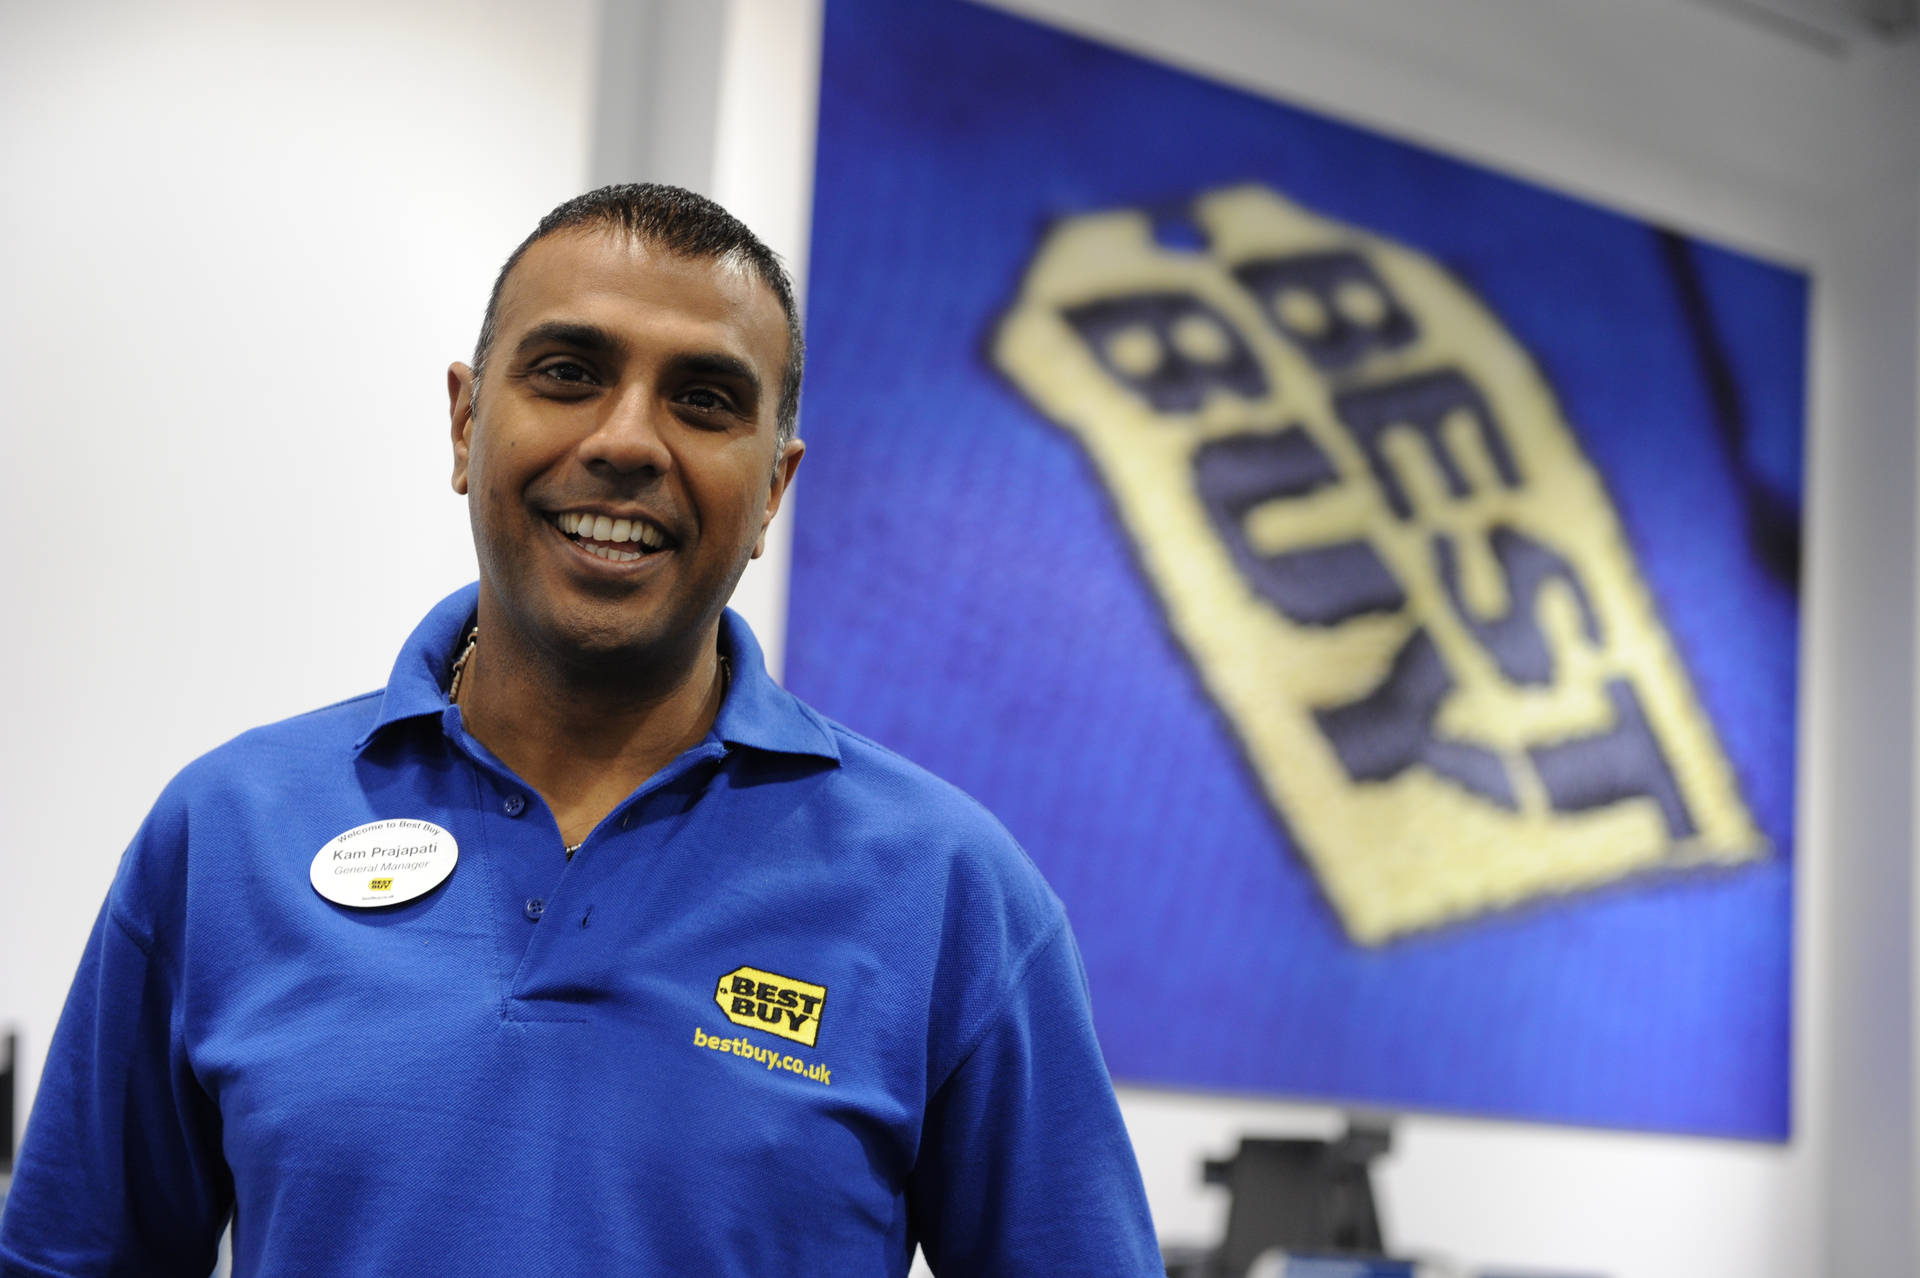 Enthusiastic Best Buy Employee Ready To Assist Customers Background